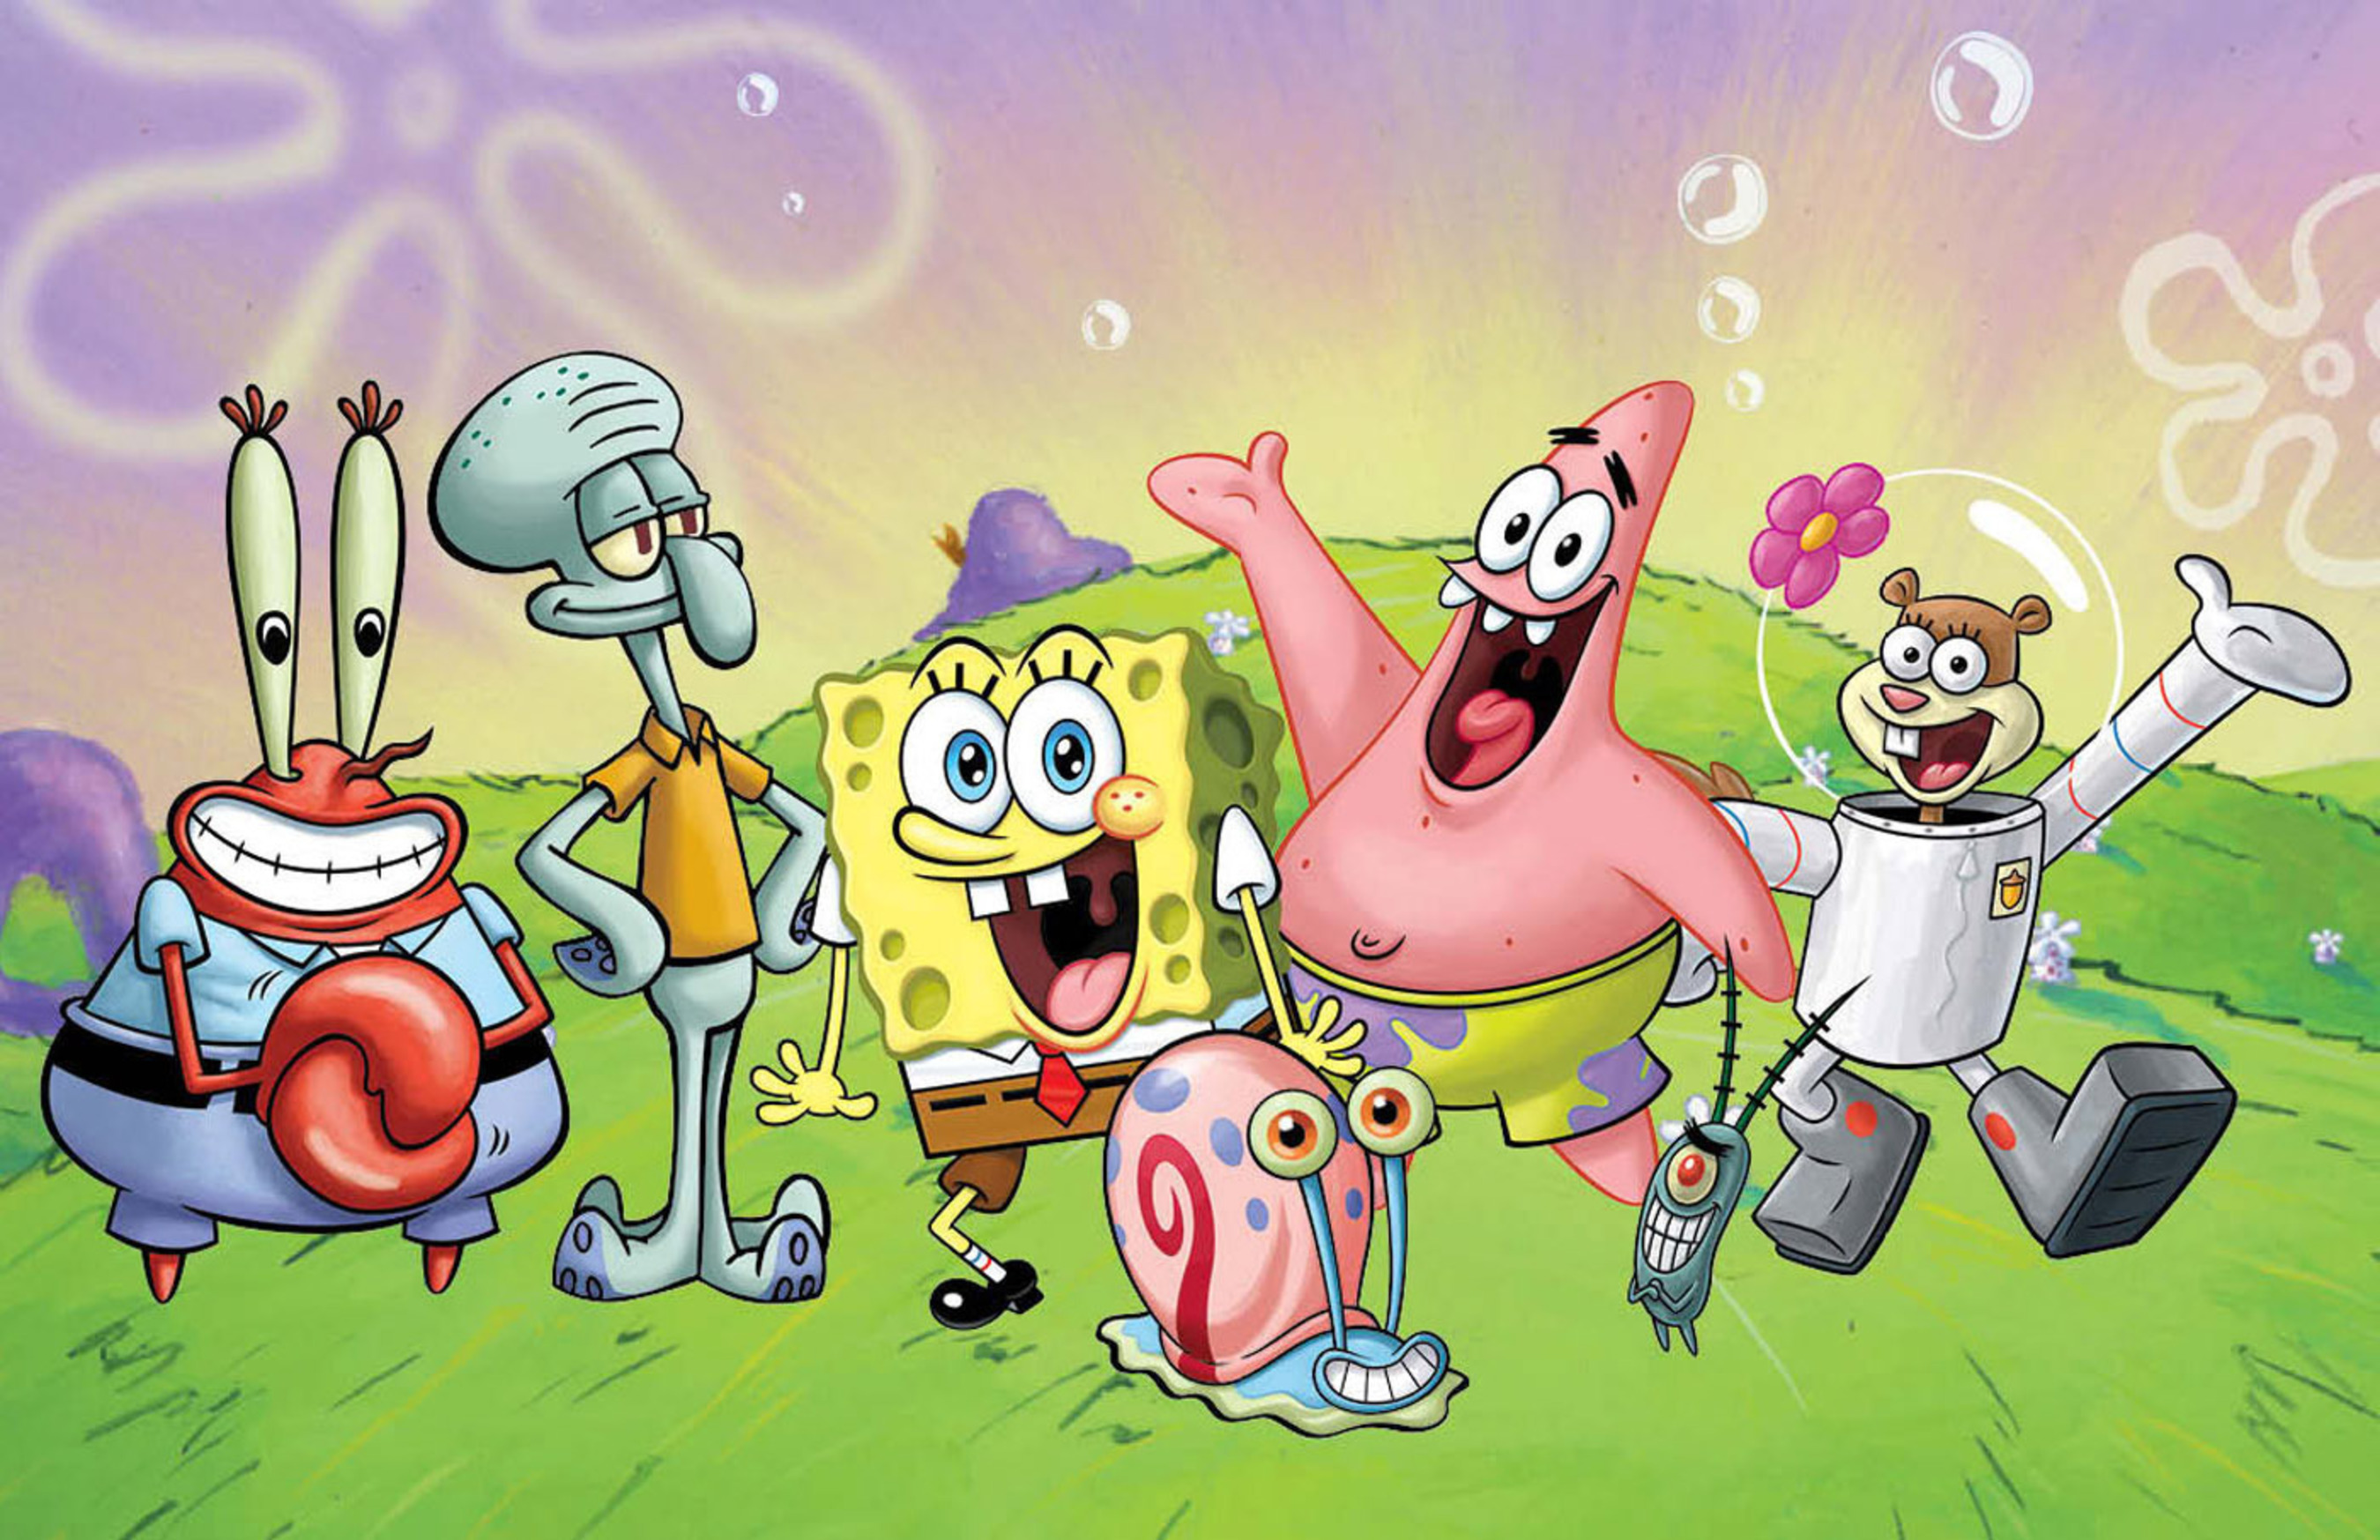 Through Jan. 4 more than 25,000 Post Office locations nationwide will feature 3 postage-paid customized SpongeBob postcards created for the "SpongeBob MailPants" letter writing program. (C)2013 Viacom, International, Inc. All Rights Reserved. (PRNewsFoto/Nickelodeon) (PRNewsFoto/NICKELODEON)